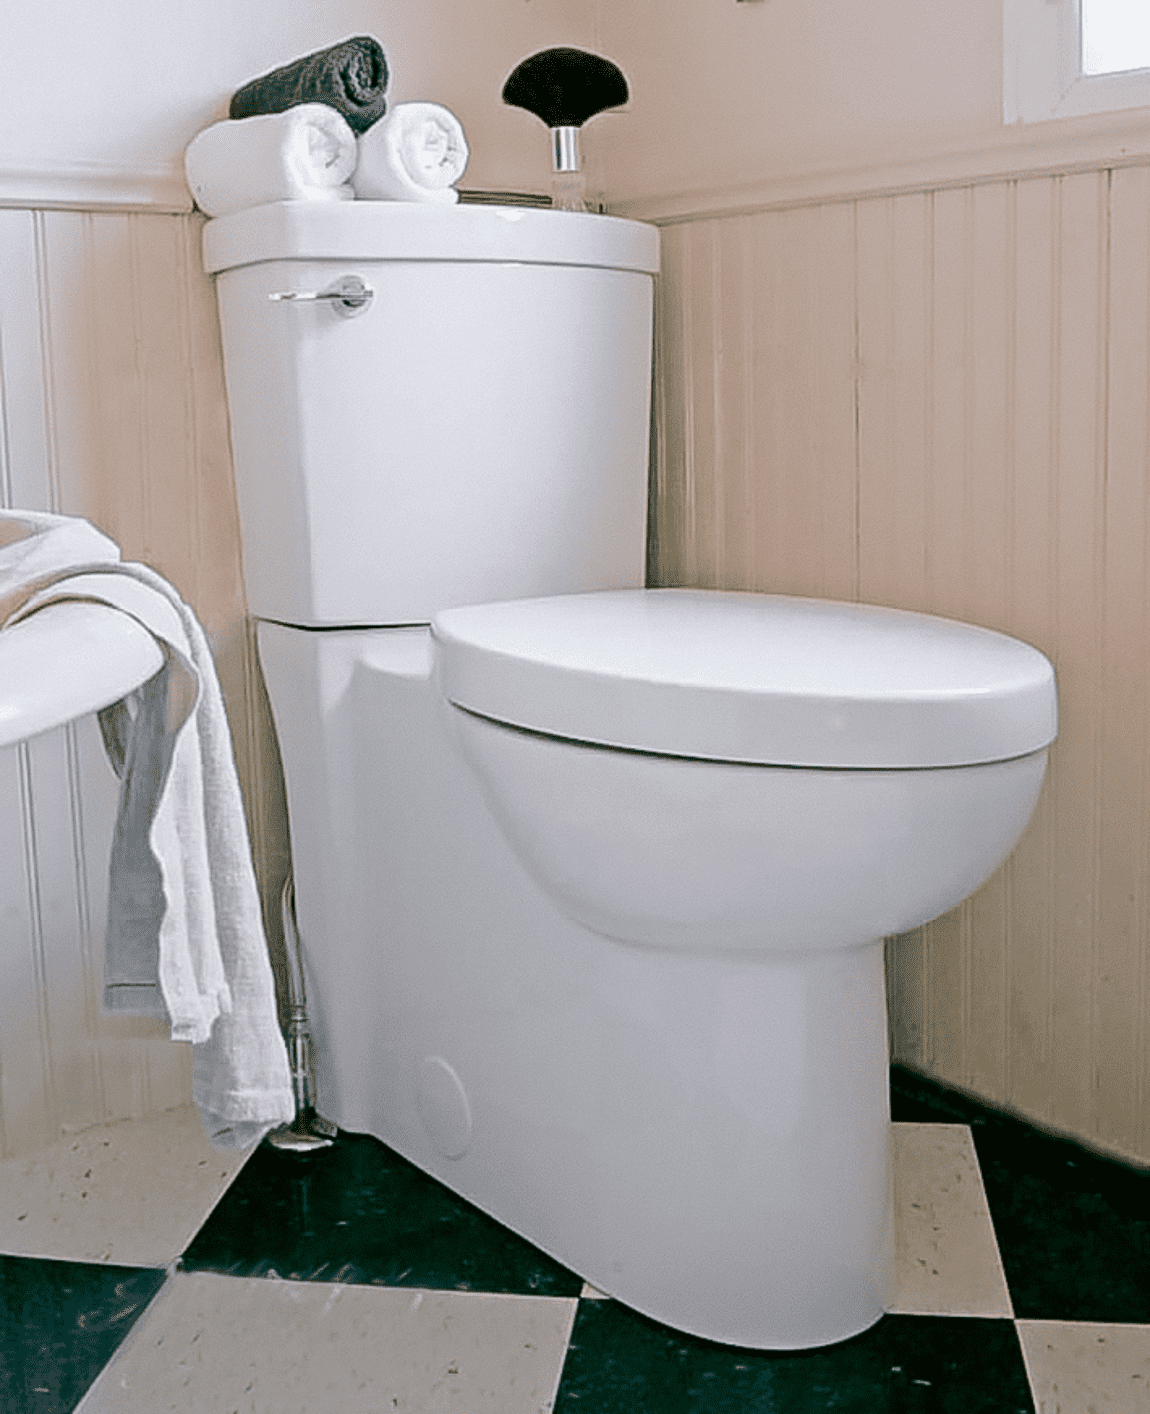 https://www.theartofdoingstuff.com/wp-content/uploads/2022/02/how-to-install-a-skirted-toilet.png